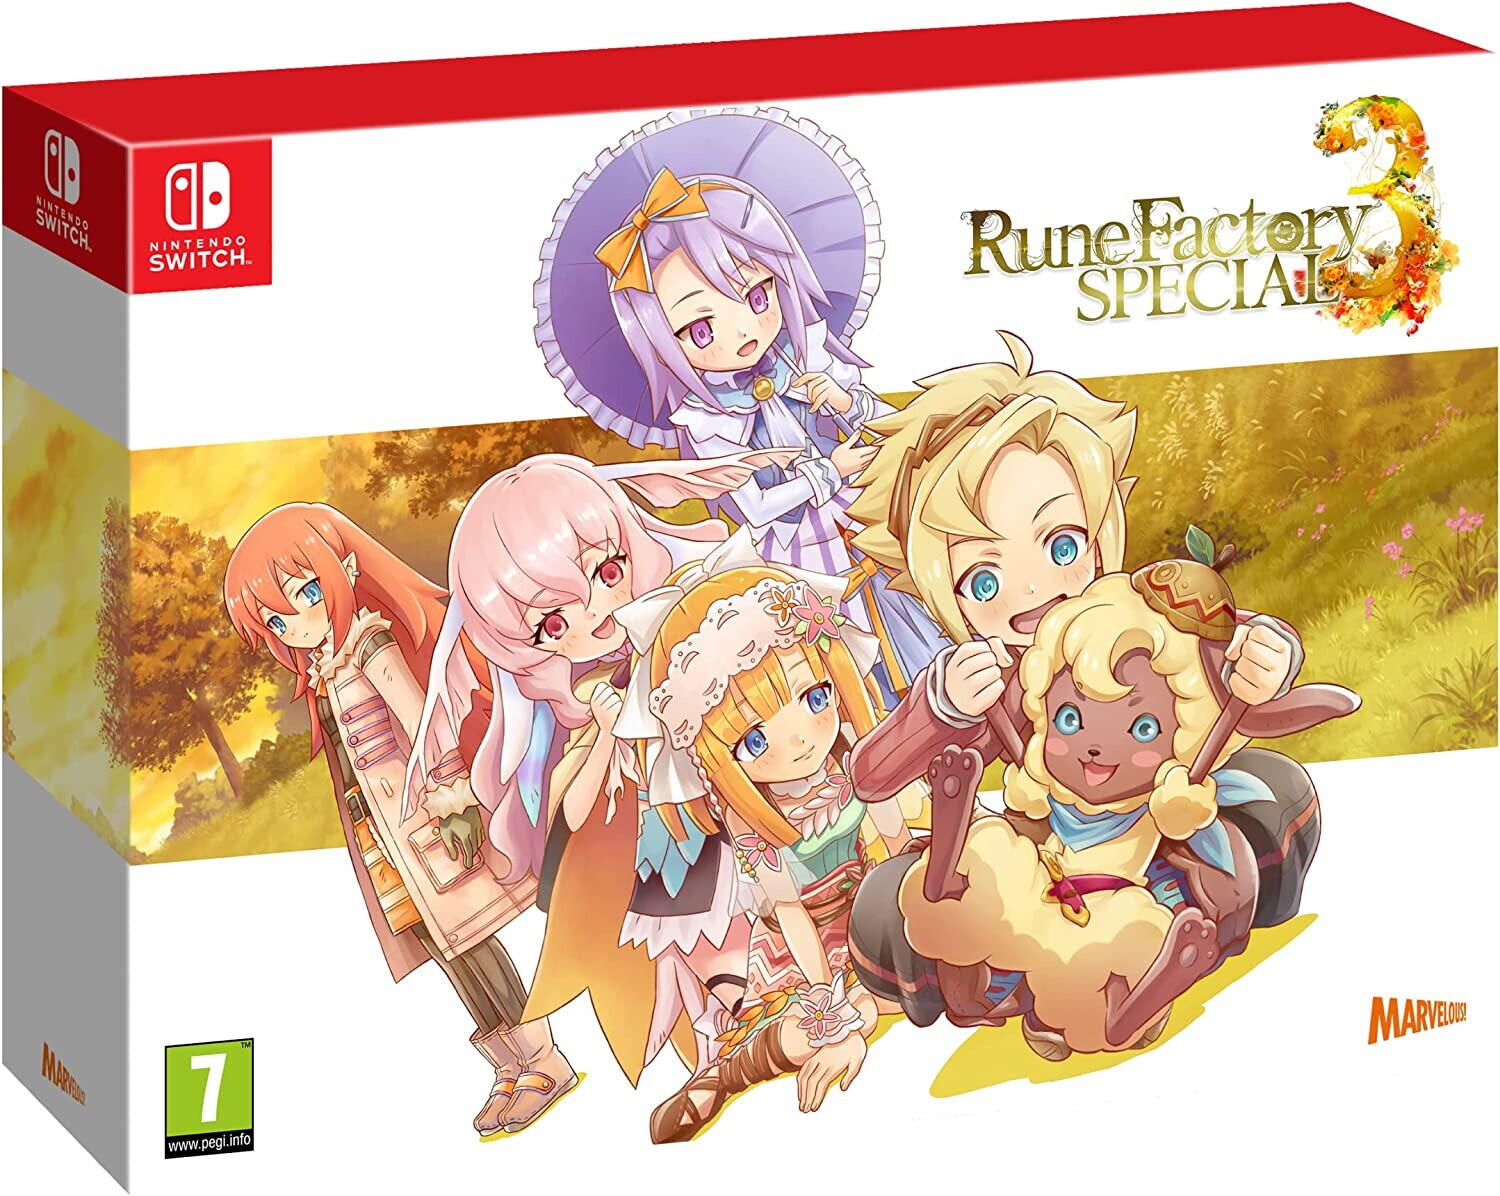 Photos - Game Marvelous Rune Factory 3: Special - Limited Edition (Switch)